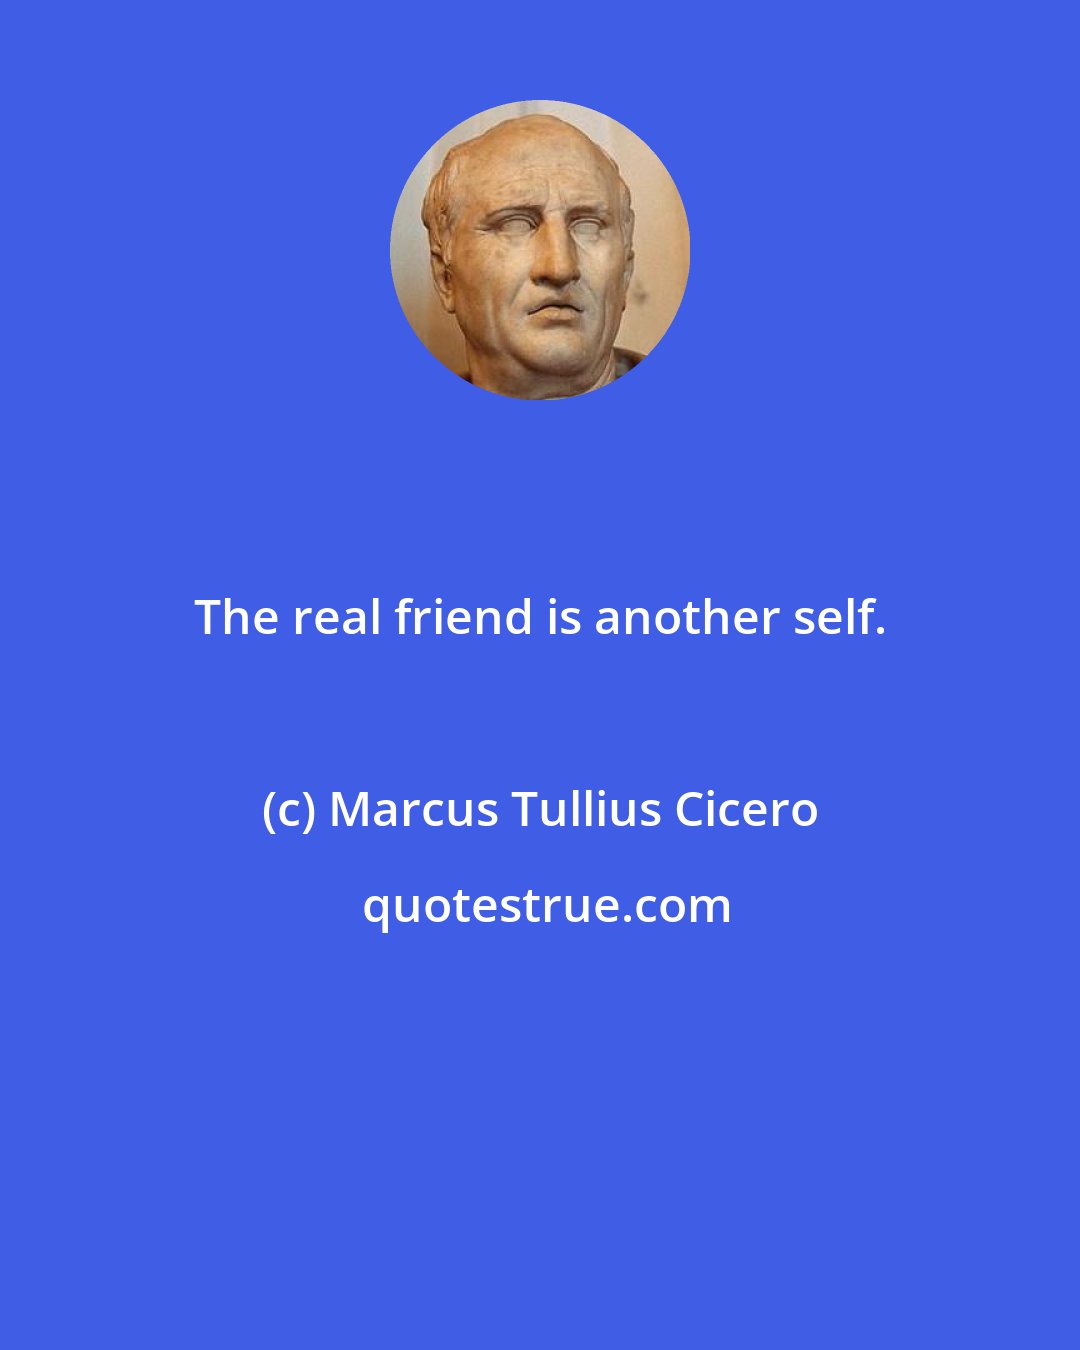 Marcus Tullius Cicero: The real friend is another self.